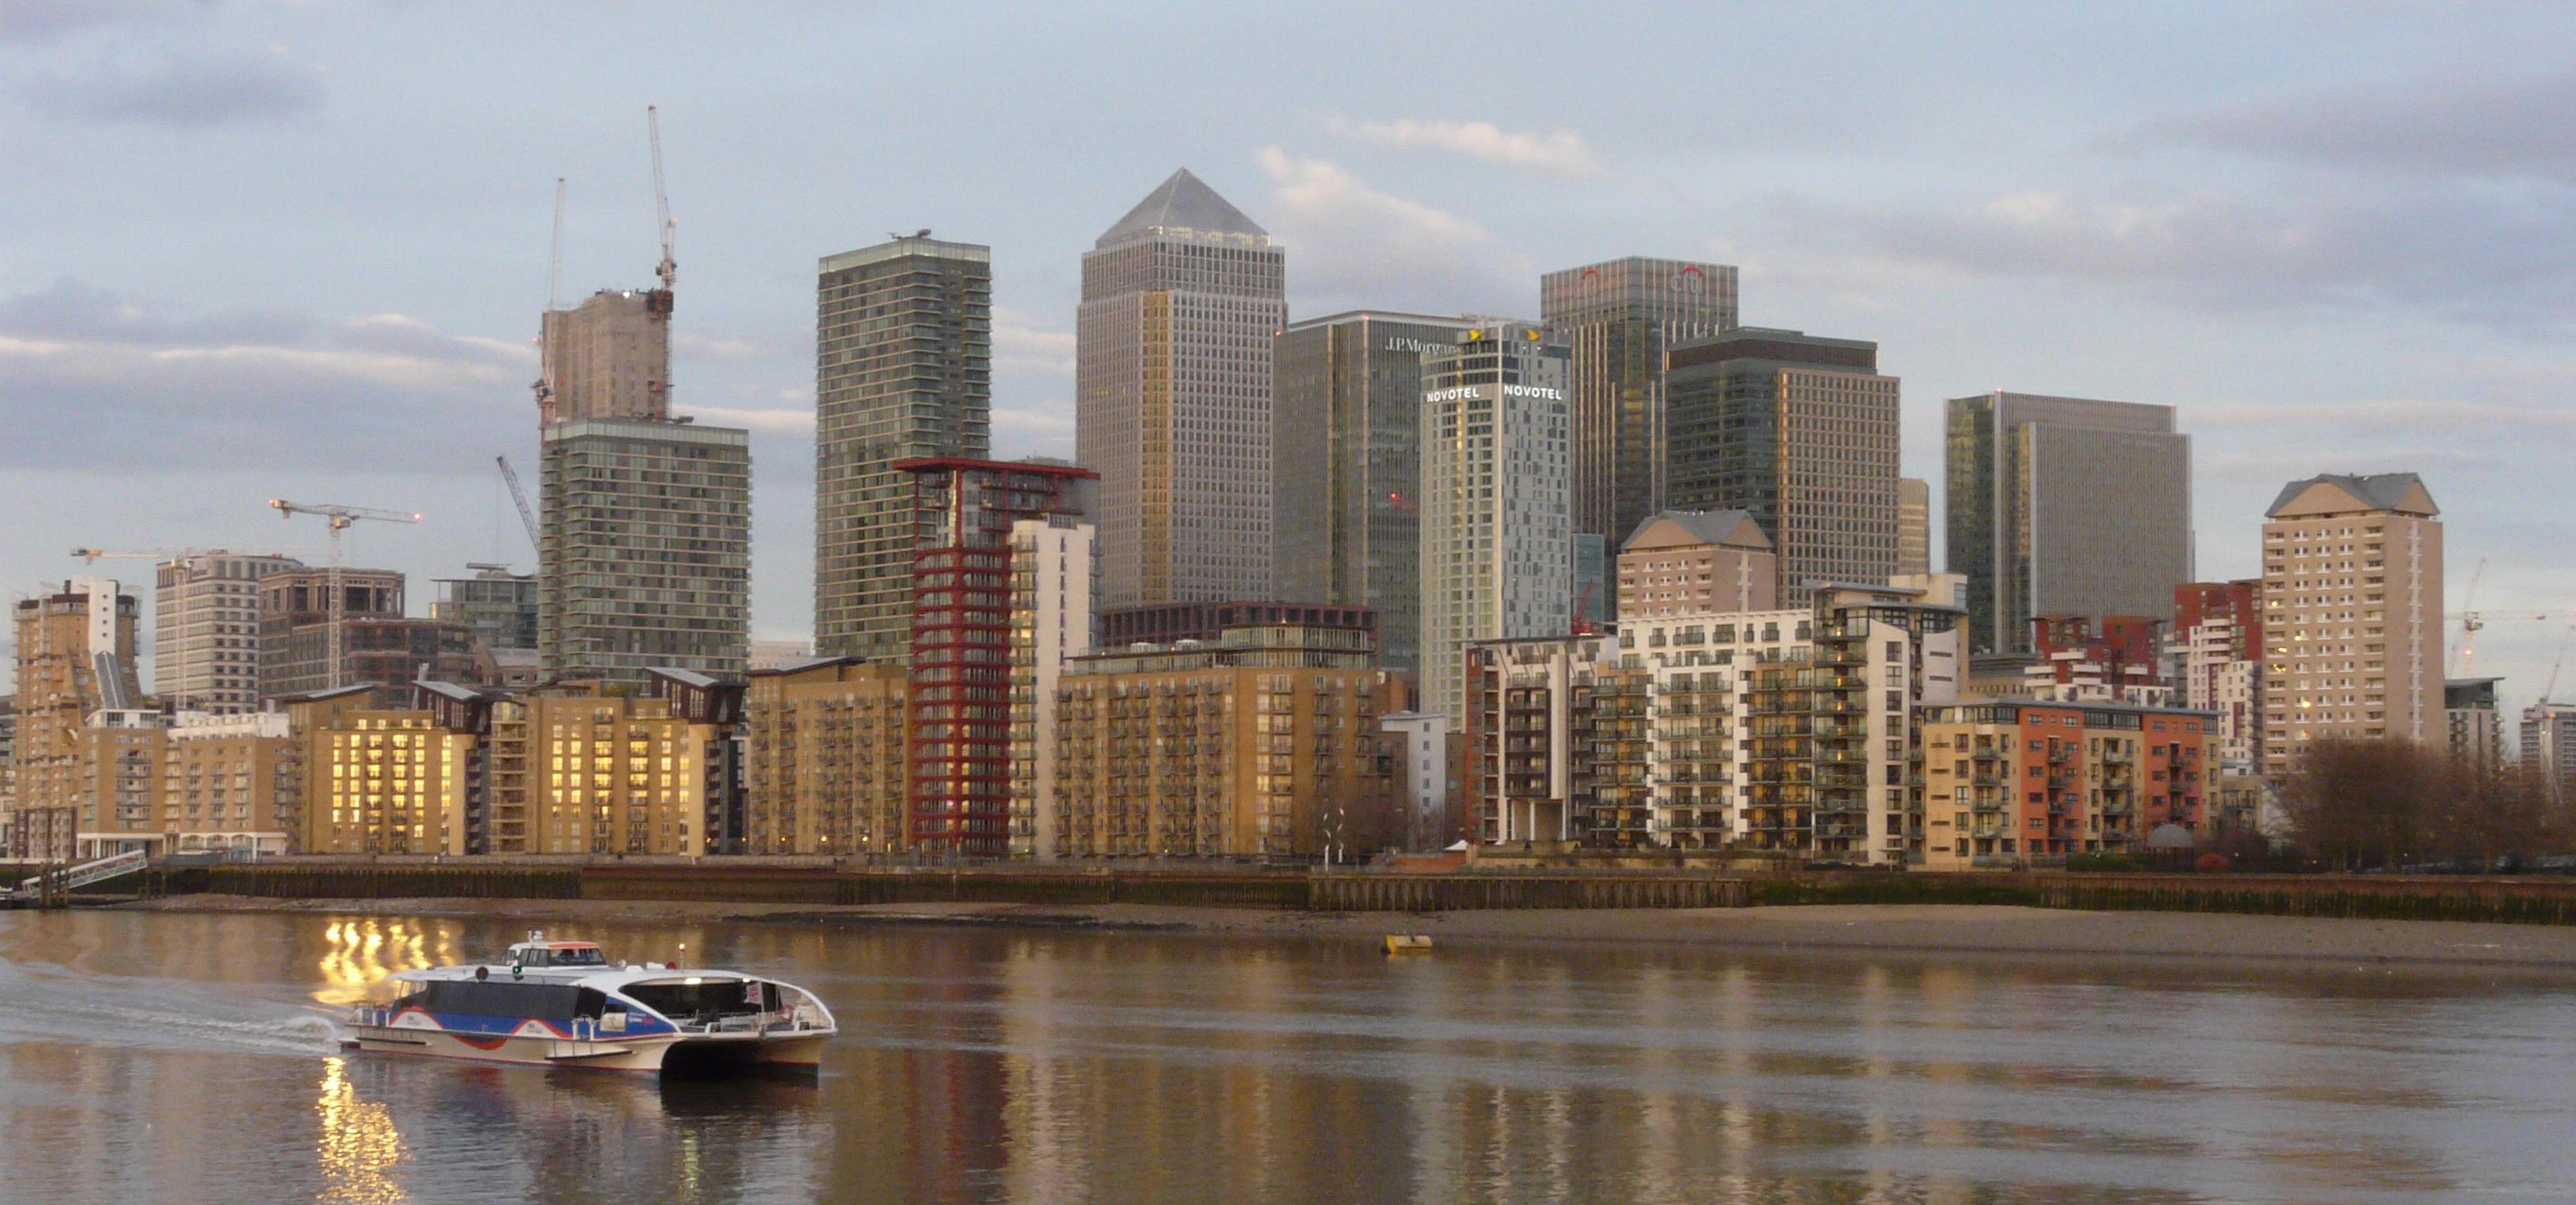 The Isle of Dogs From the South Bank